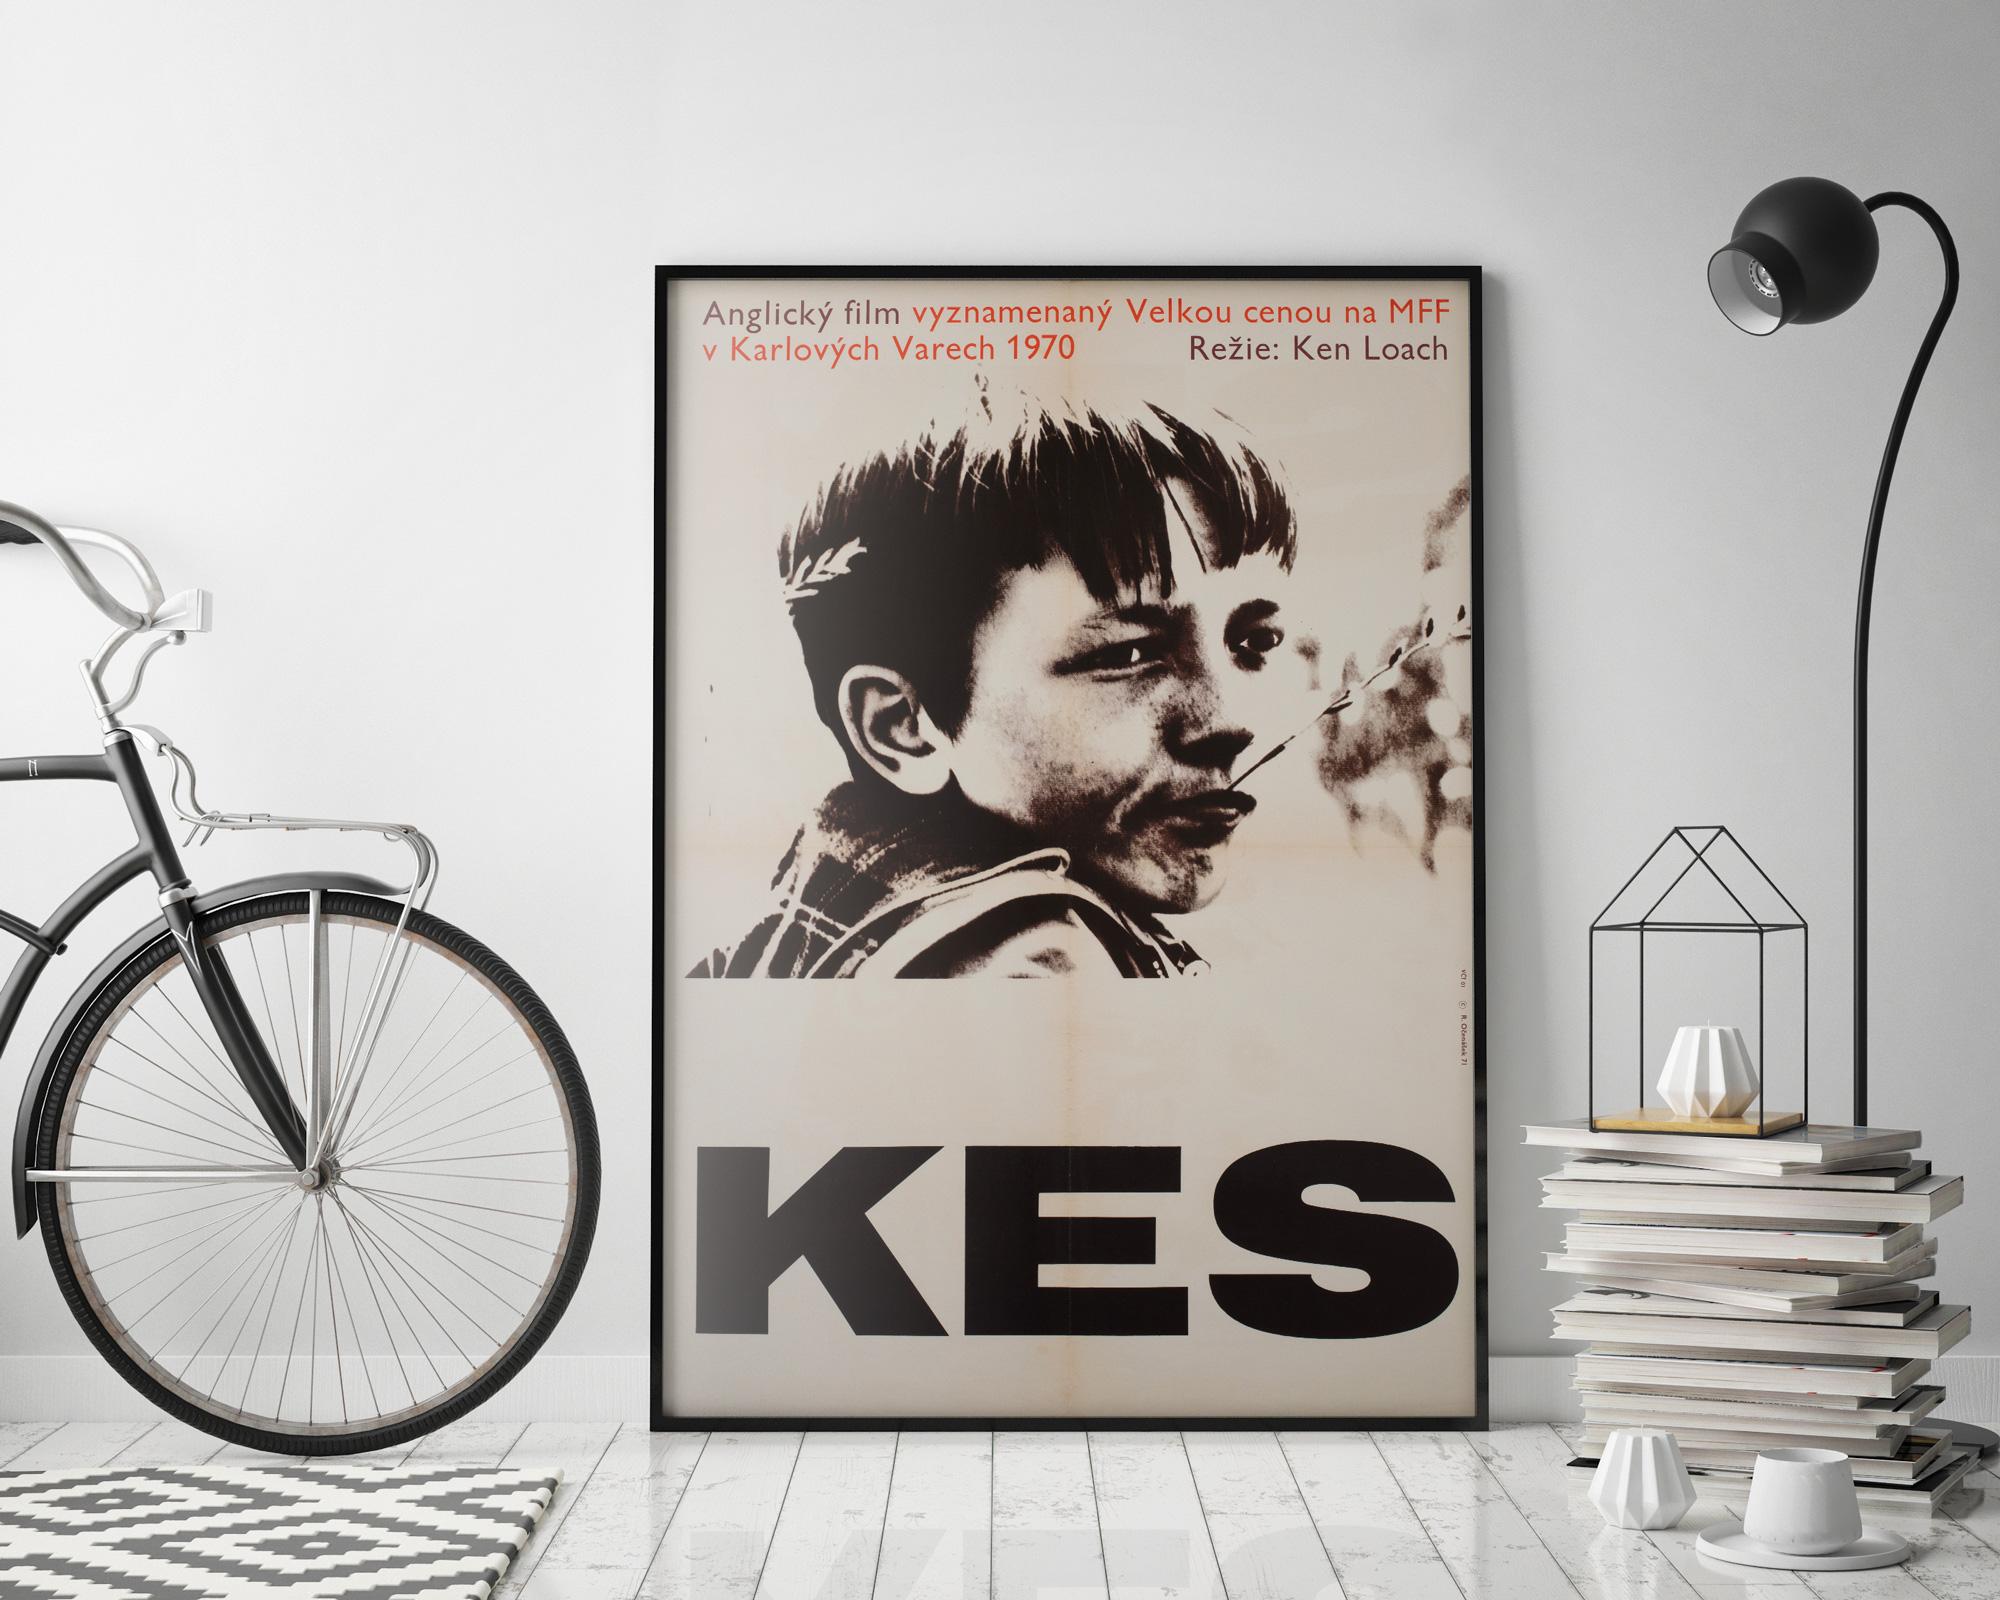 We love this original Czech film poster for Ken Loach's gritty masterpiece Kes. An impossibly rare poster, especially in the larger Czech A1 size.

This original vintage movie poster is sized 22 3/4 x 32 1/2 inches. It will be sent rolled